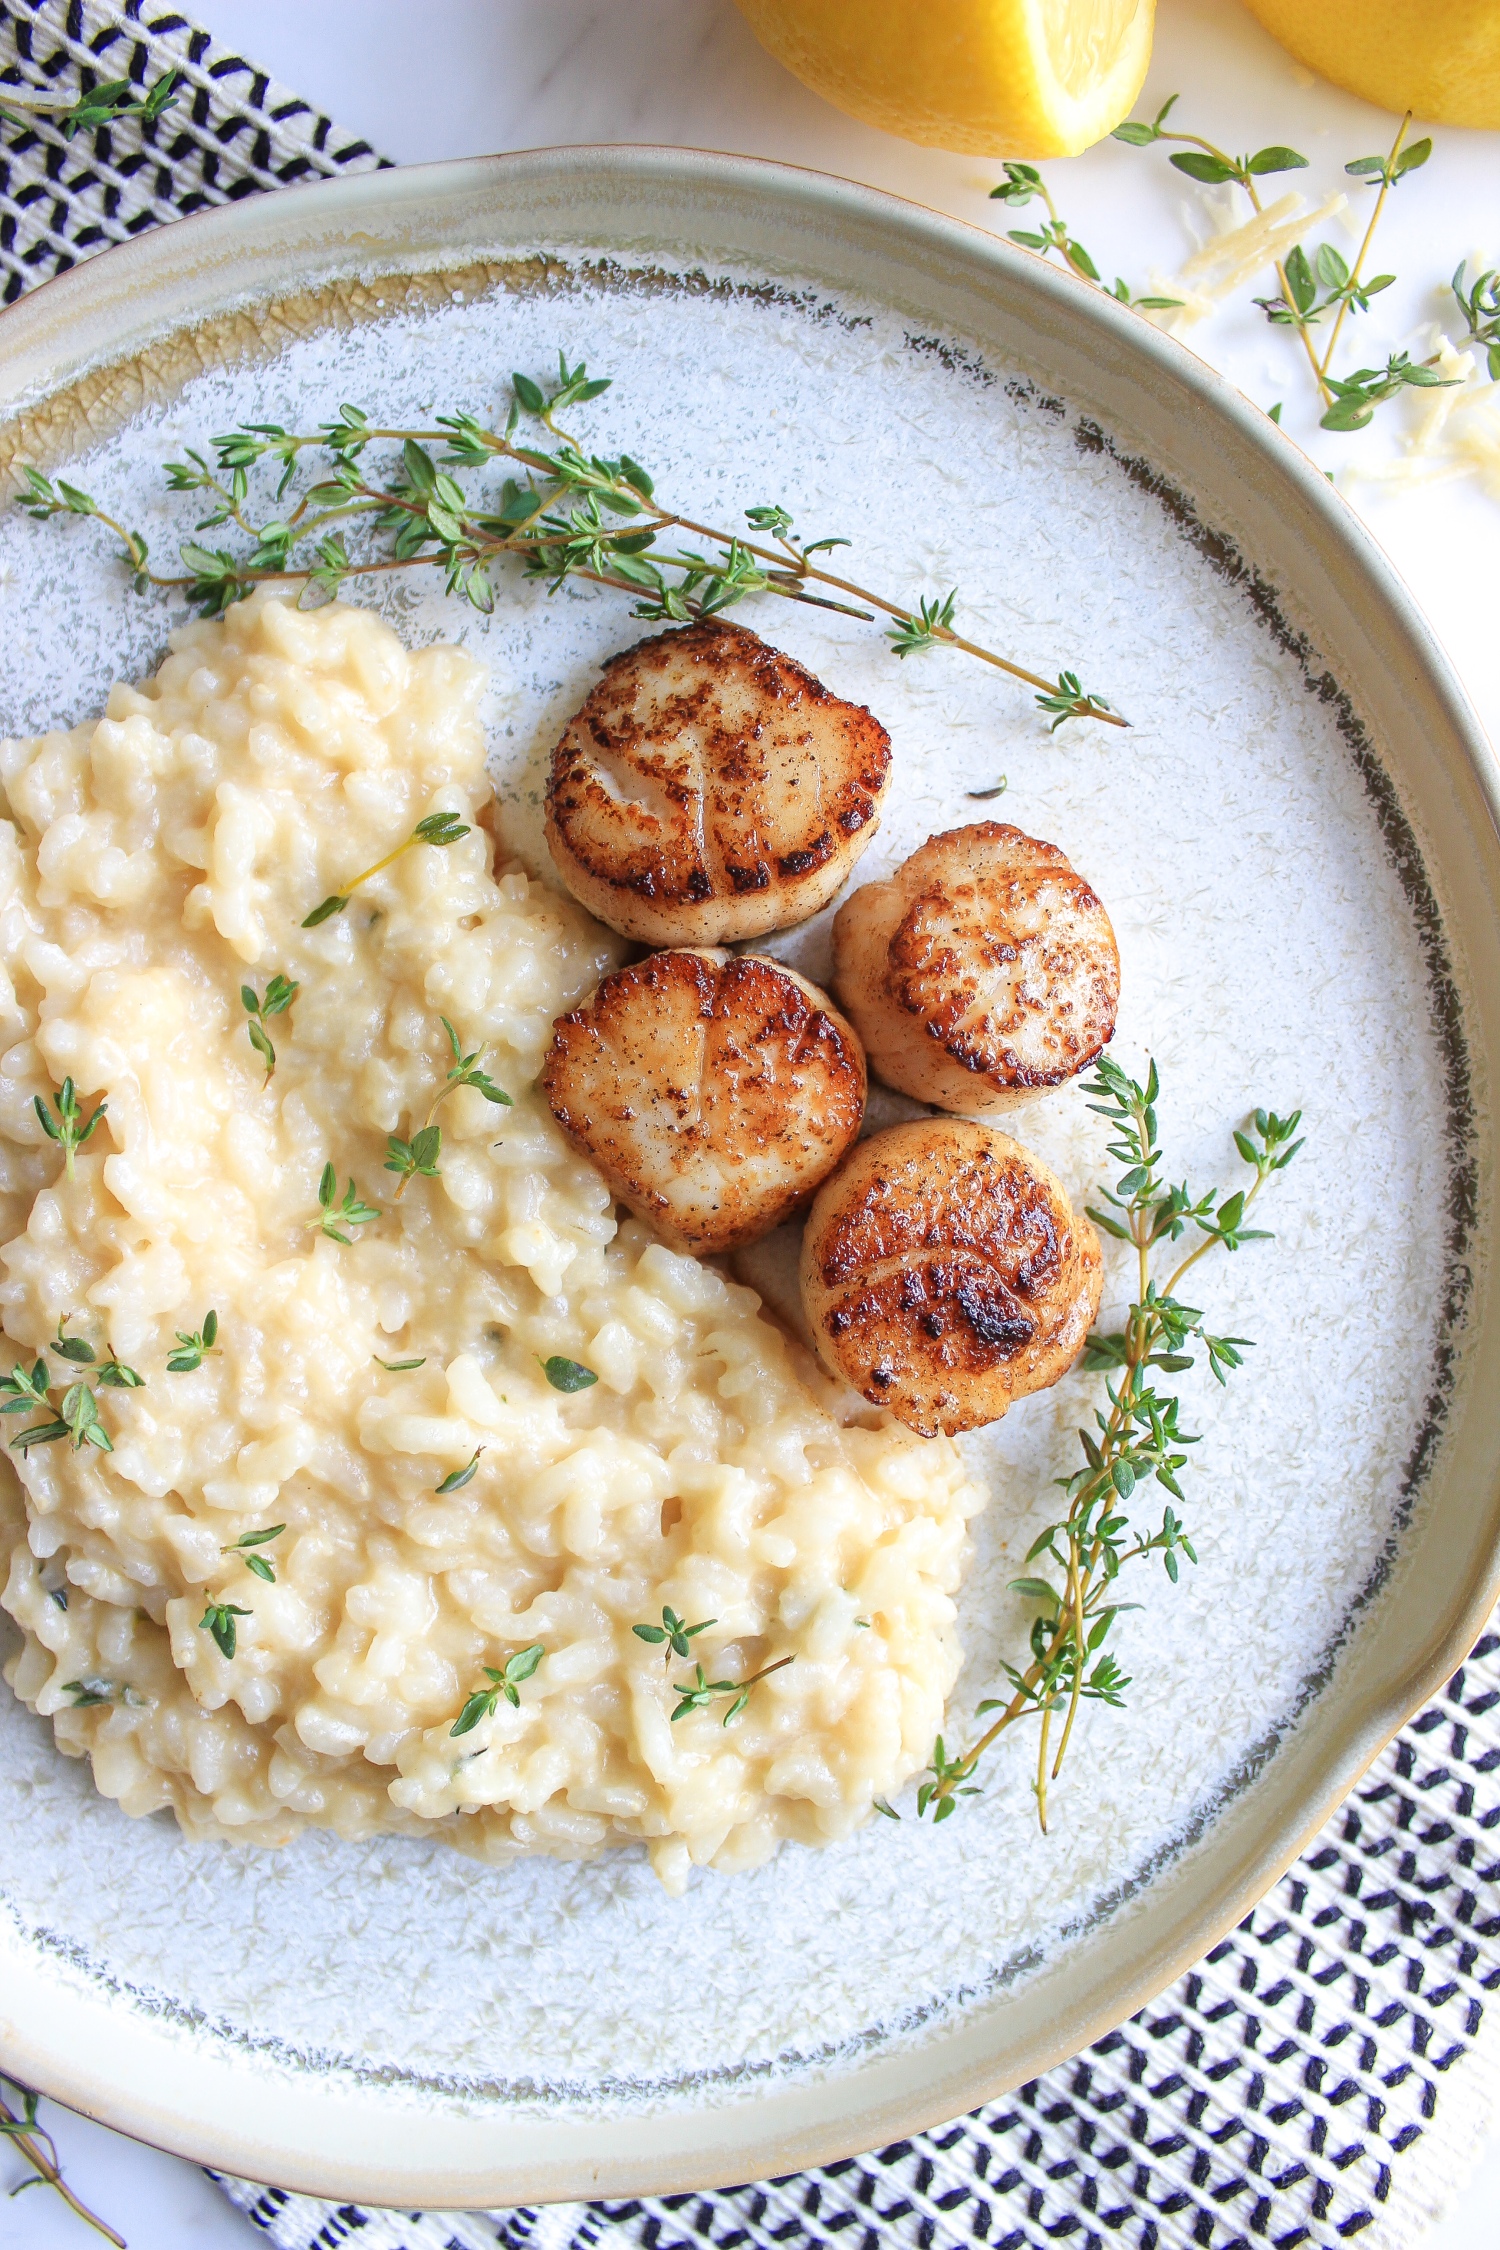  Parmesan, Thyme & Lemon Risotto with Seared Scallops